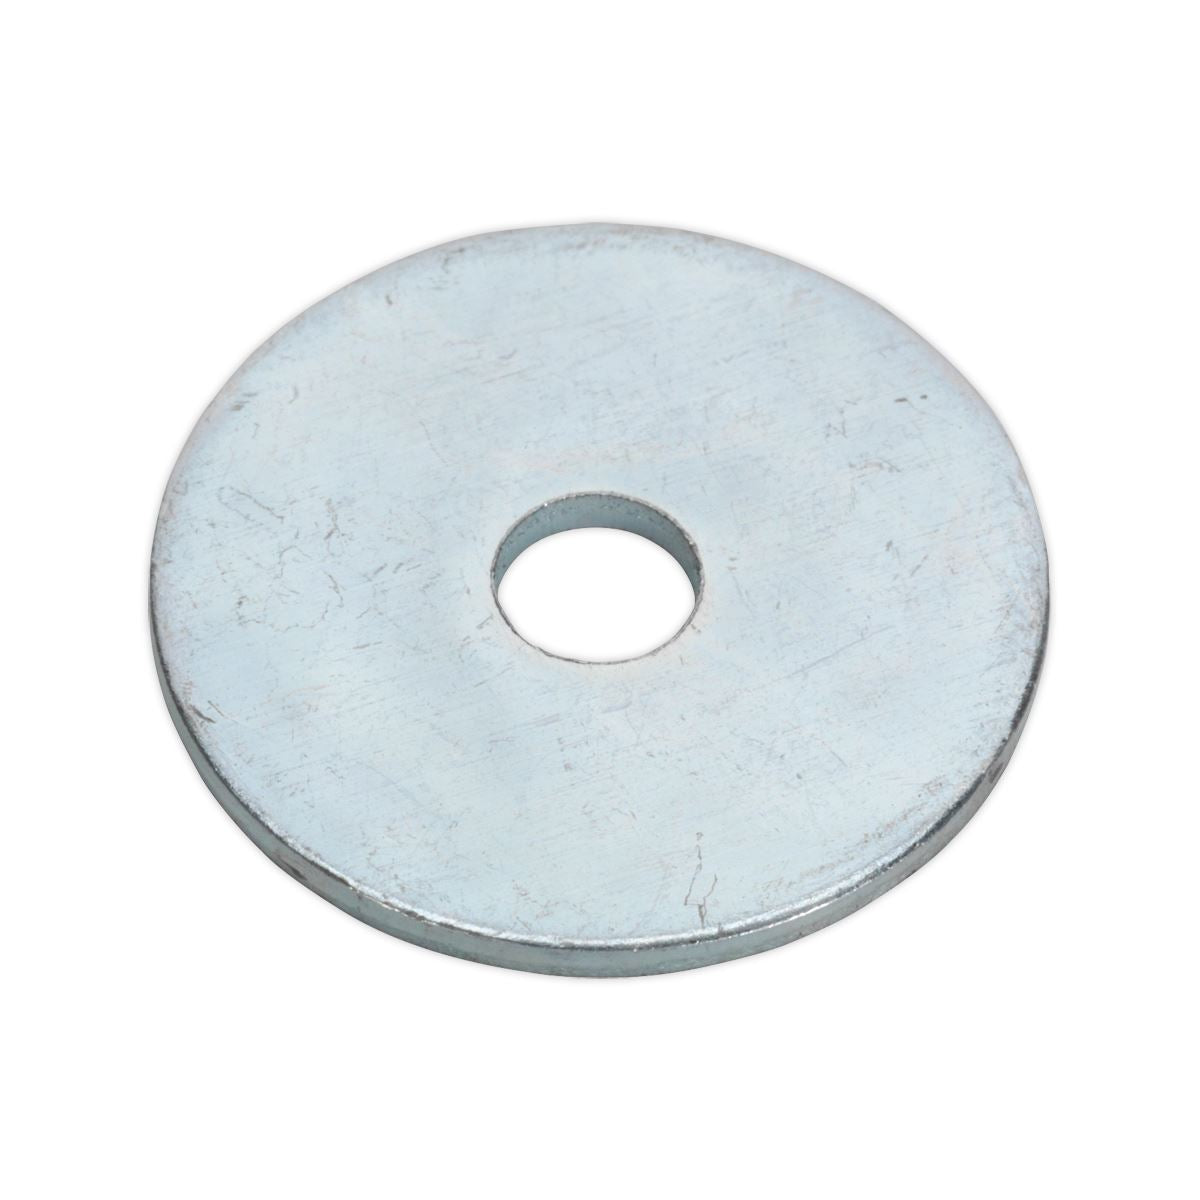 Sealey Repair Washer M5 x 25mm Zinc Plated Pack of 100